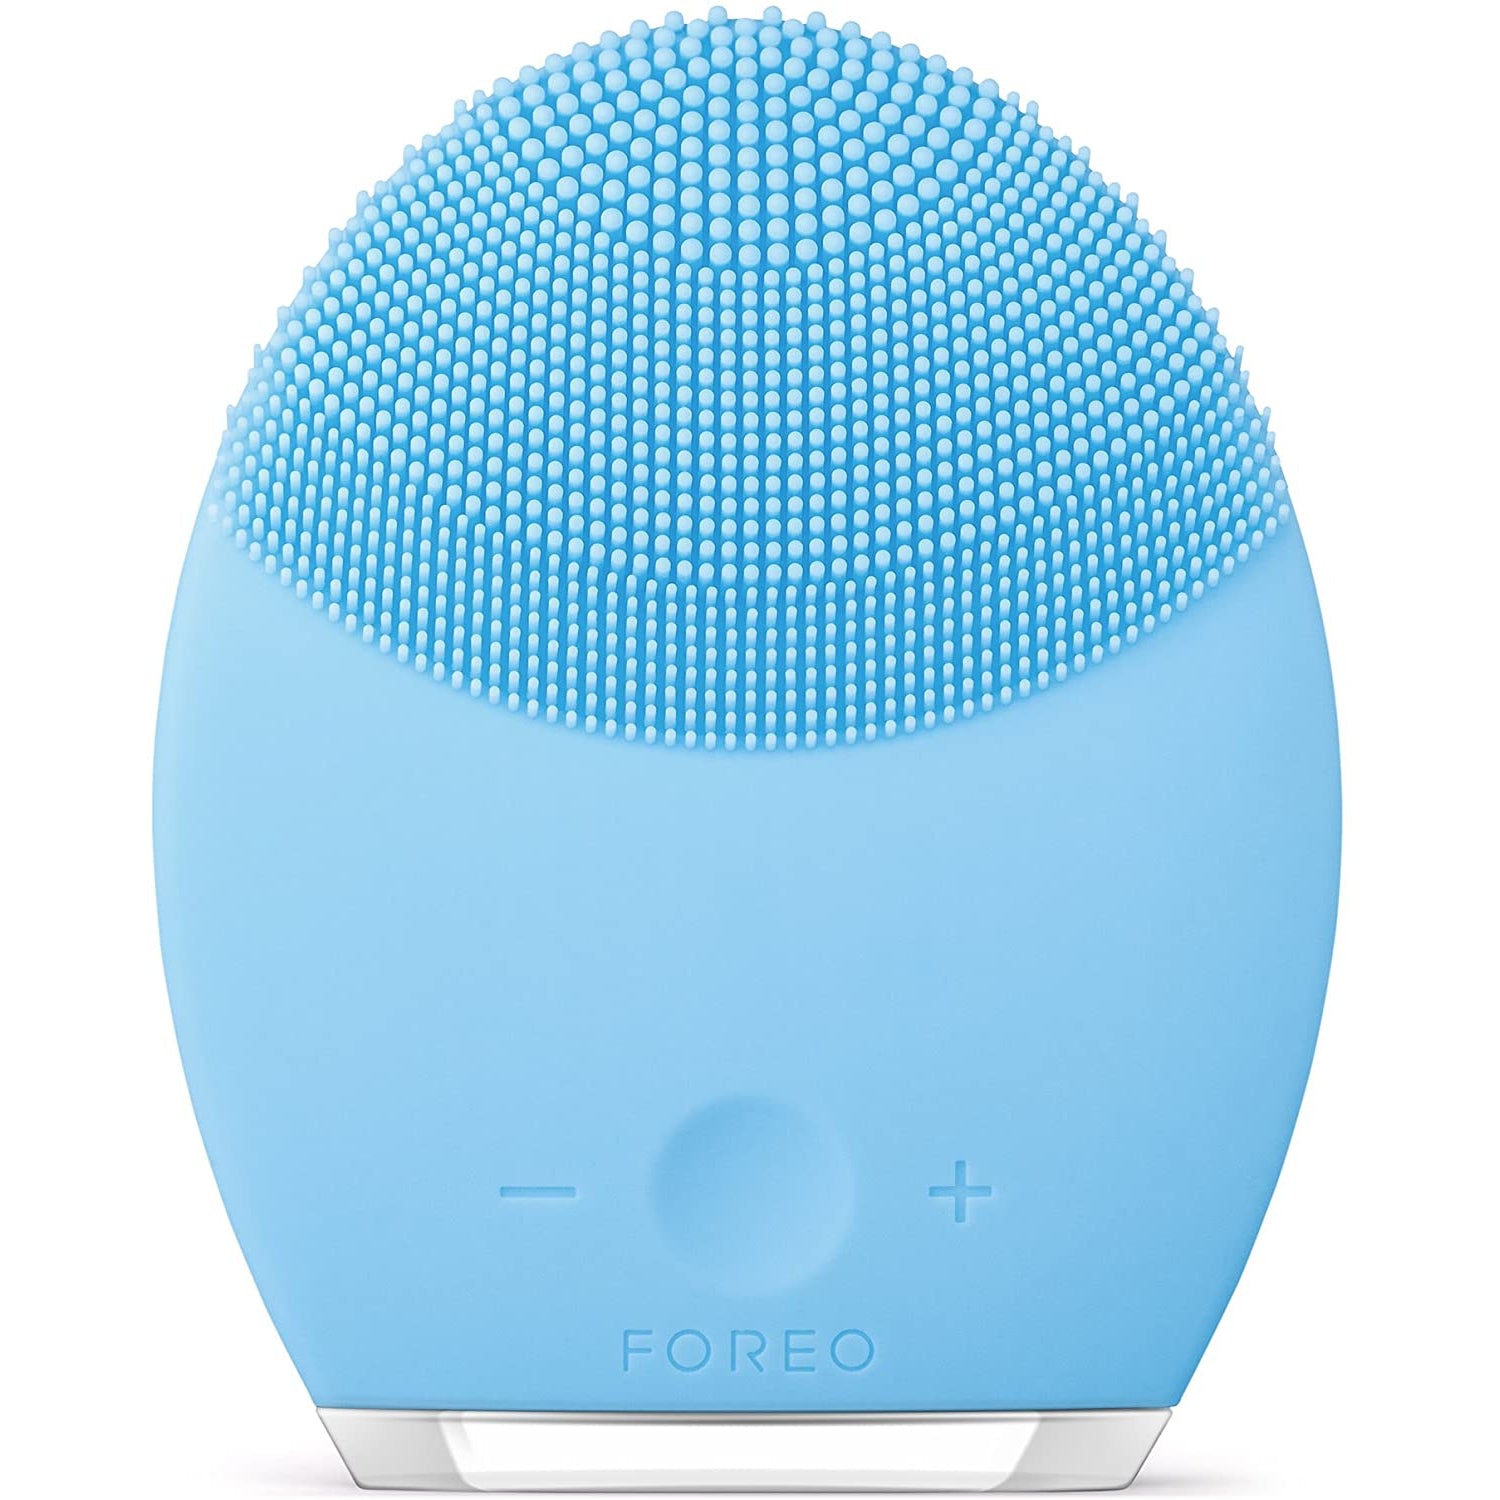 Foreo Luna 2 Facial Brush and Anti-Aging Face Massager